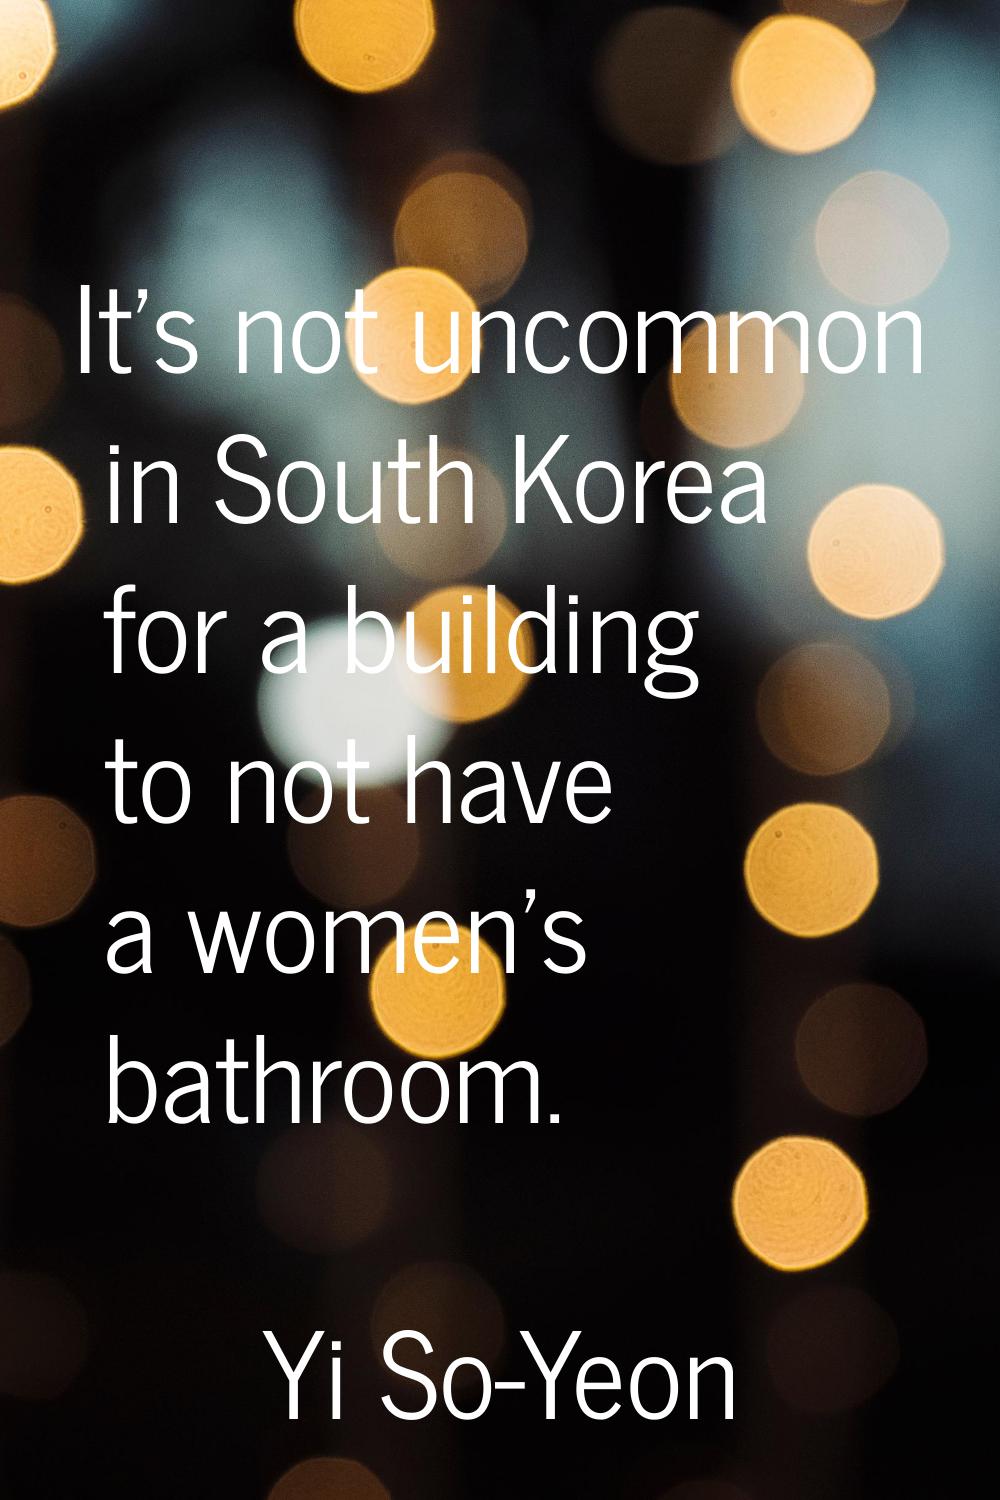 It's not uncommon in South Korea for a building to not have a women's bathroom.